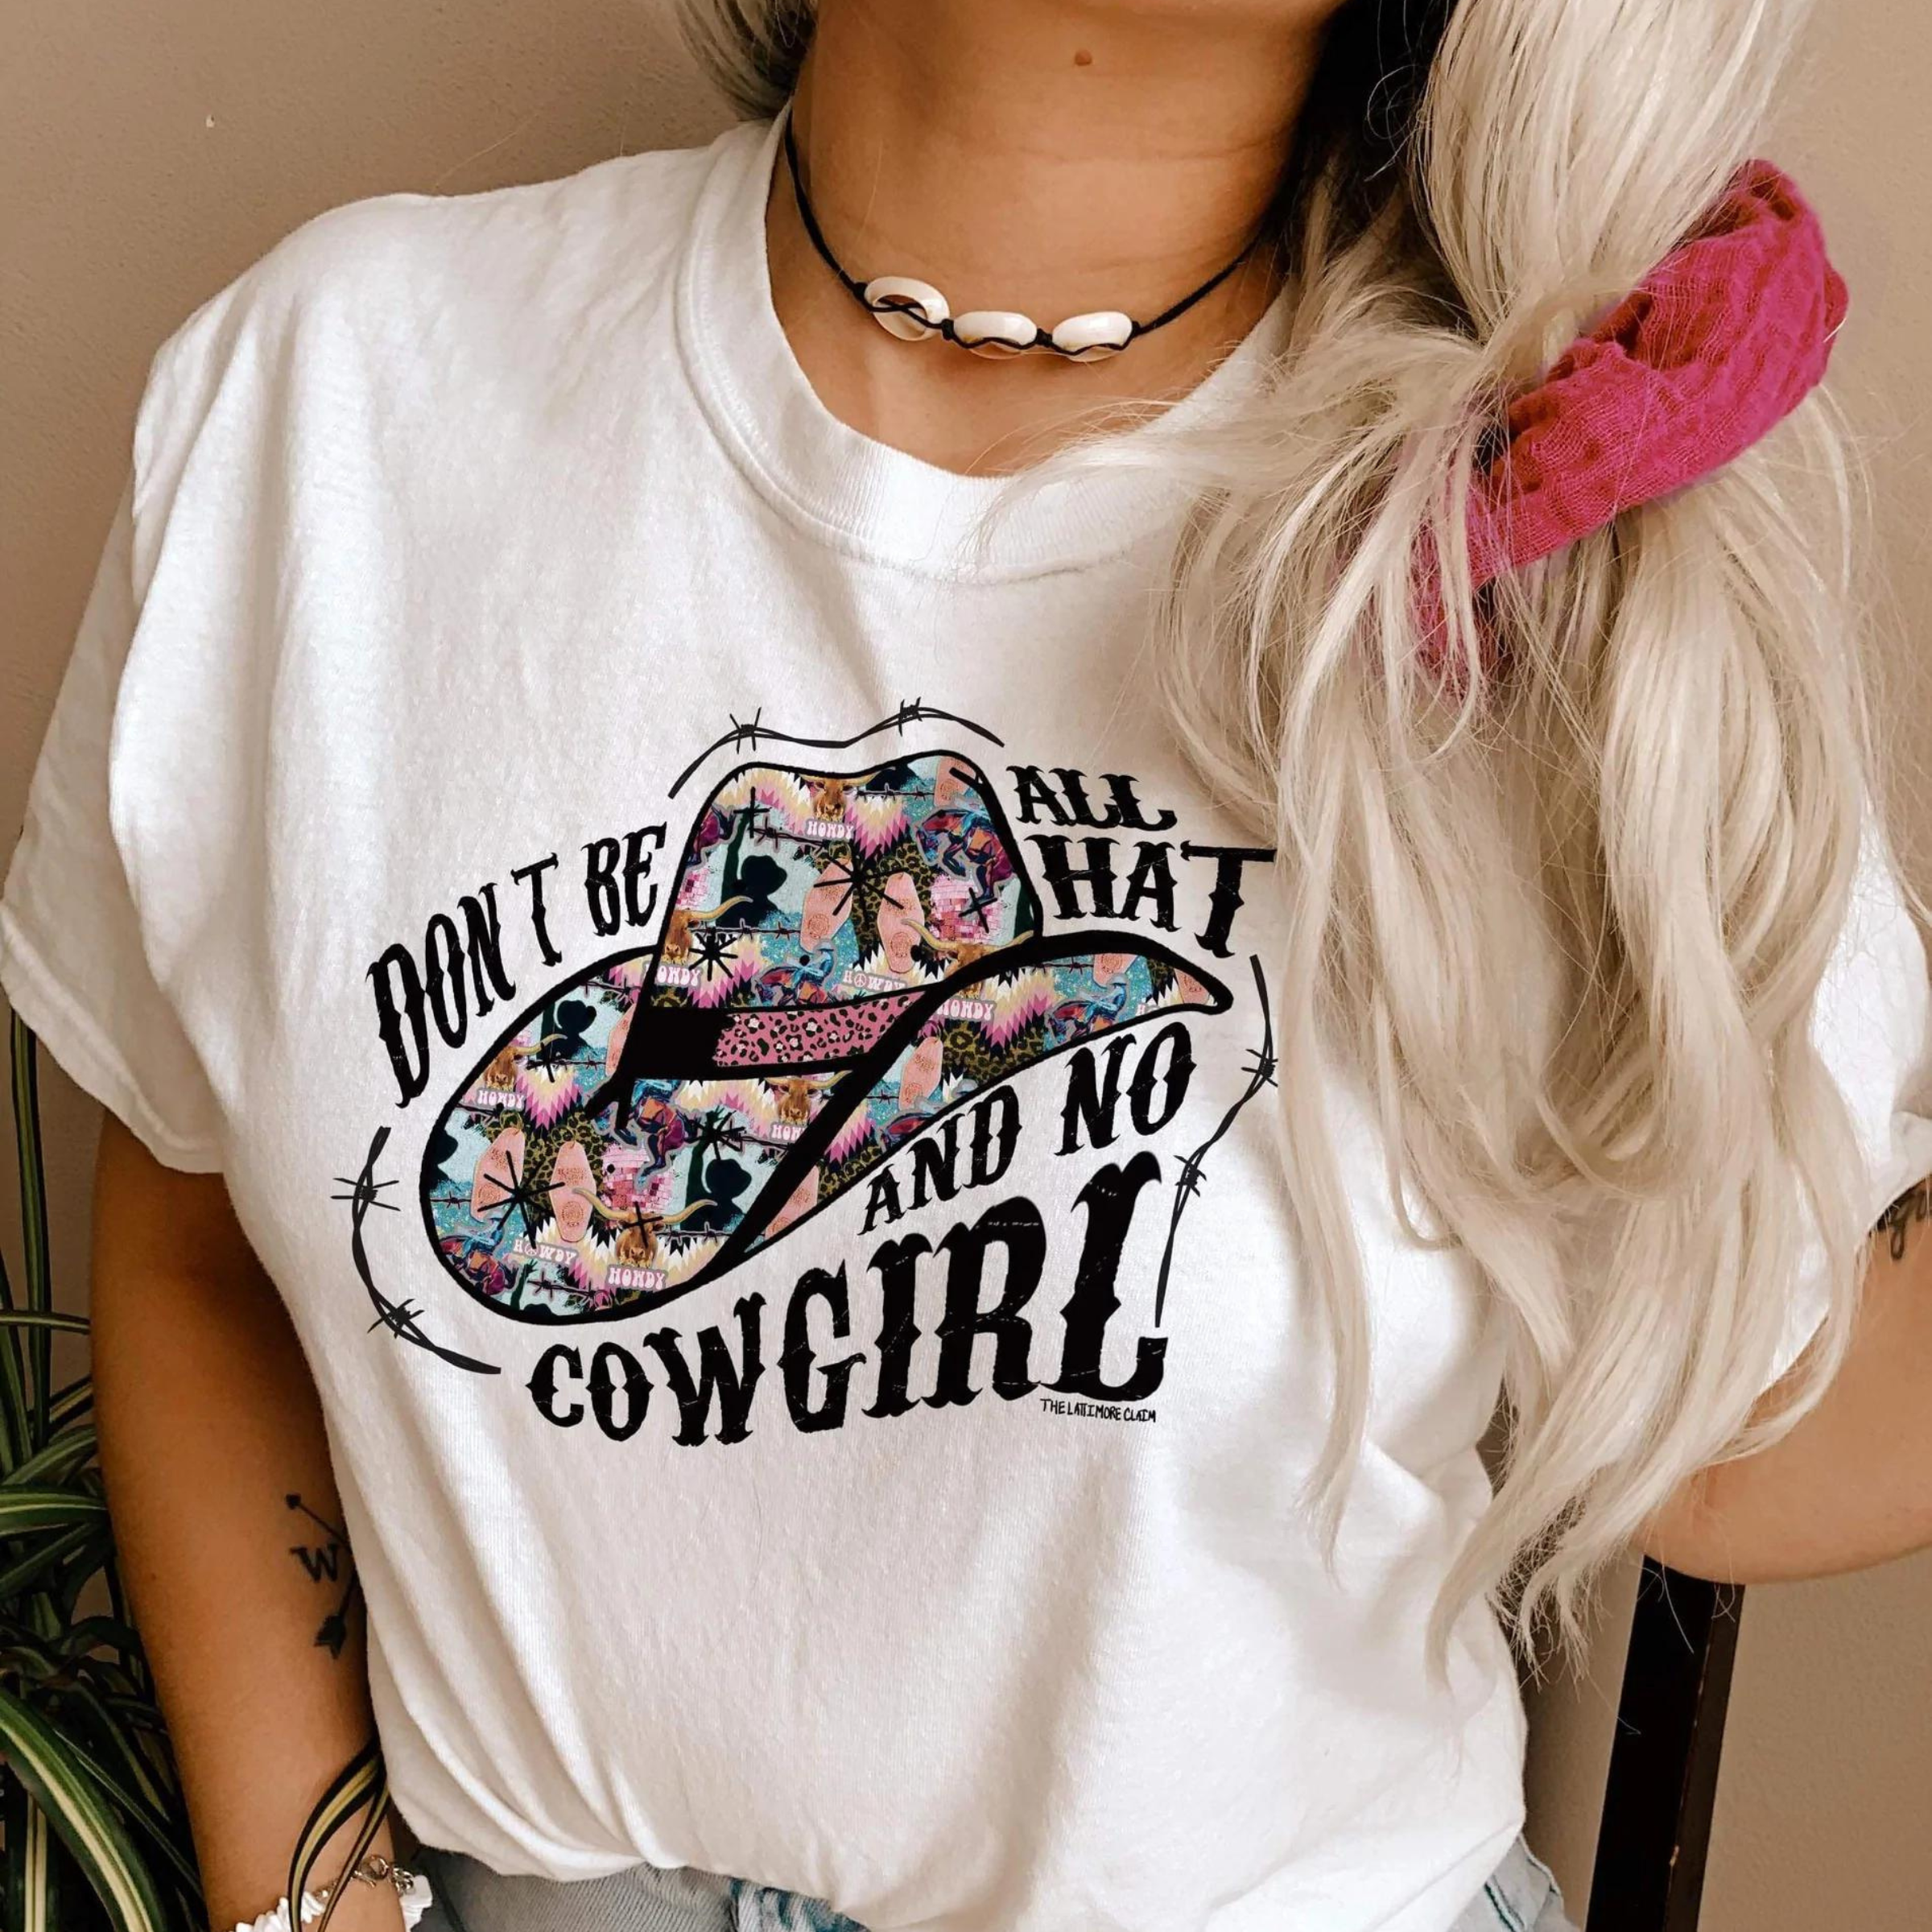 This white Bella + Canvas graphic tee includes a crew neckline, short sleeves, and cute hand drawn design. of a cowboy hats when fun + bright prints, and the words "Don't Be All That And No Cowgirl". It also has black barbwire intertwined with the words and around the hat. This sweatshirt is shown in this photo to be styled with denim jeans and shell jewelry. The model also has her hair pulled to the side with a pink scrunchie - fun pop of color! 